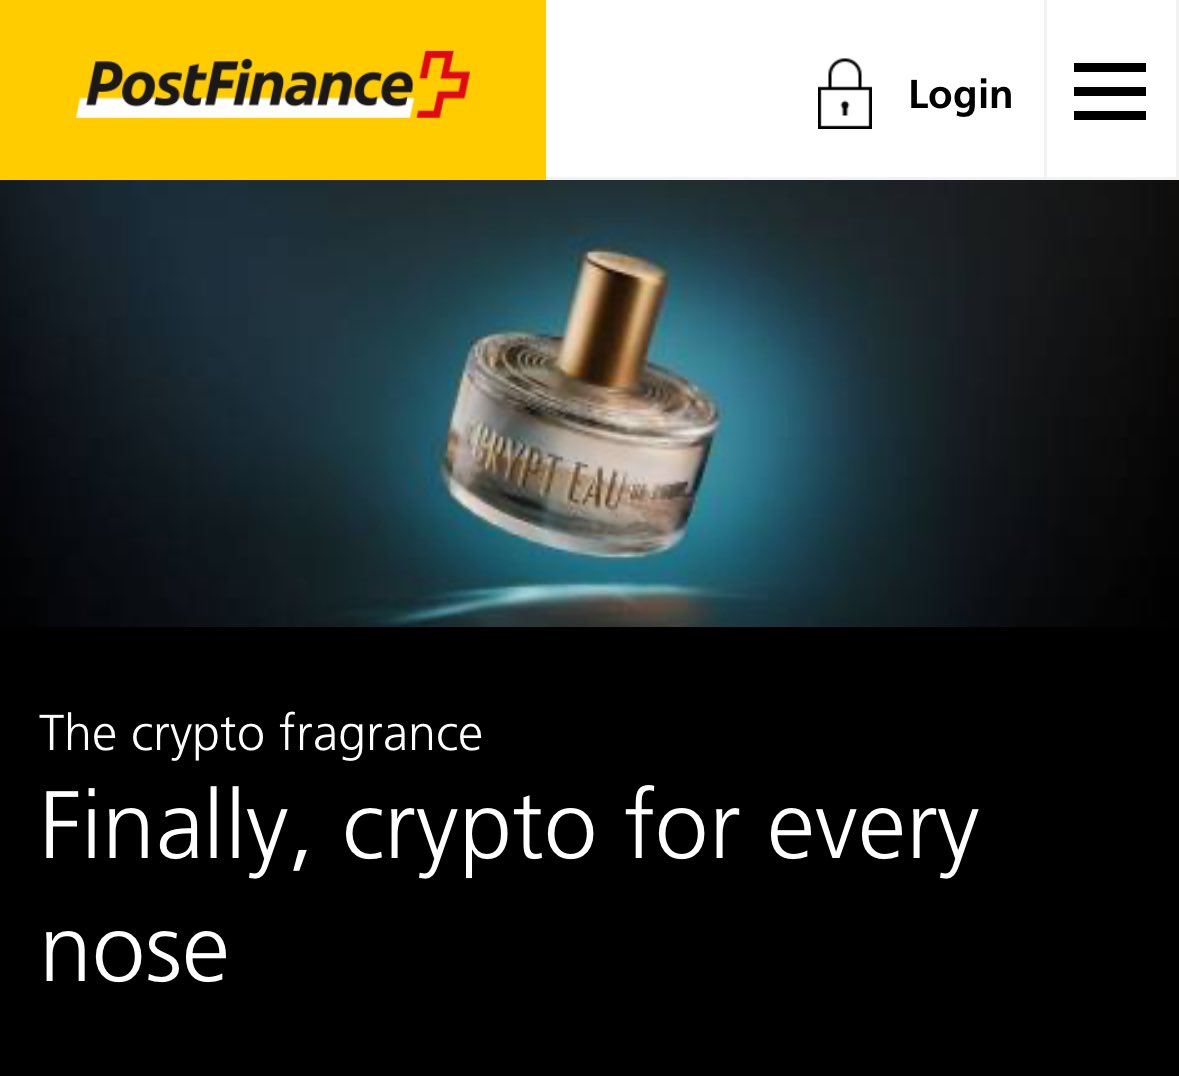 Le Crypt Eau de parfum, the fragrance of crypto, created by @PostFinance, with the help of AI. True story postfinance.ch/en/private/cam…